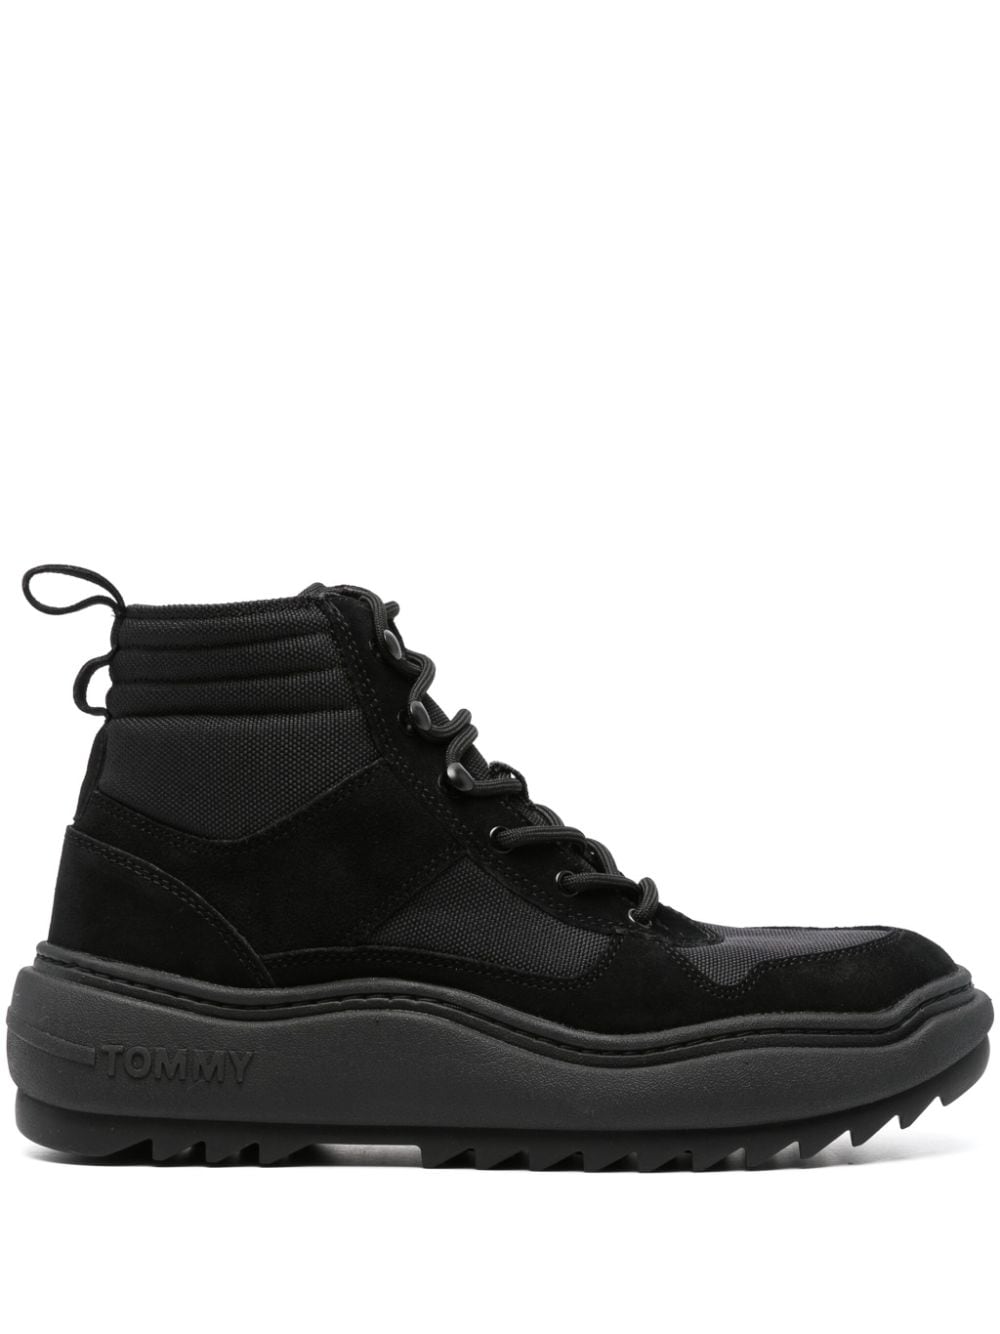 Tommy Jeans panelled lace-up boots - Black von Tommy Jeans